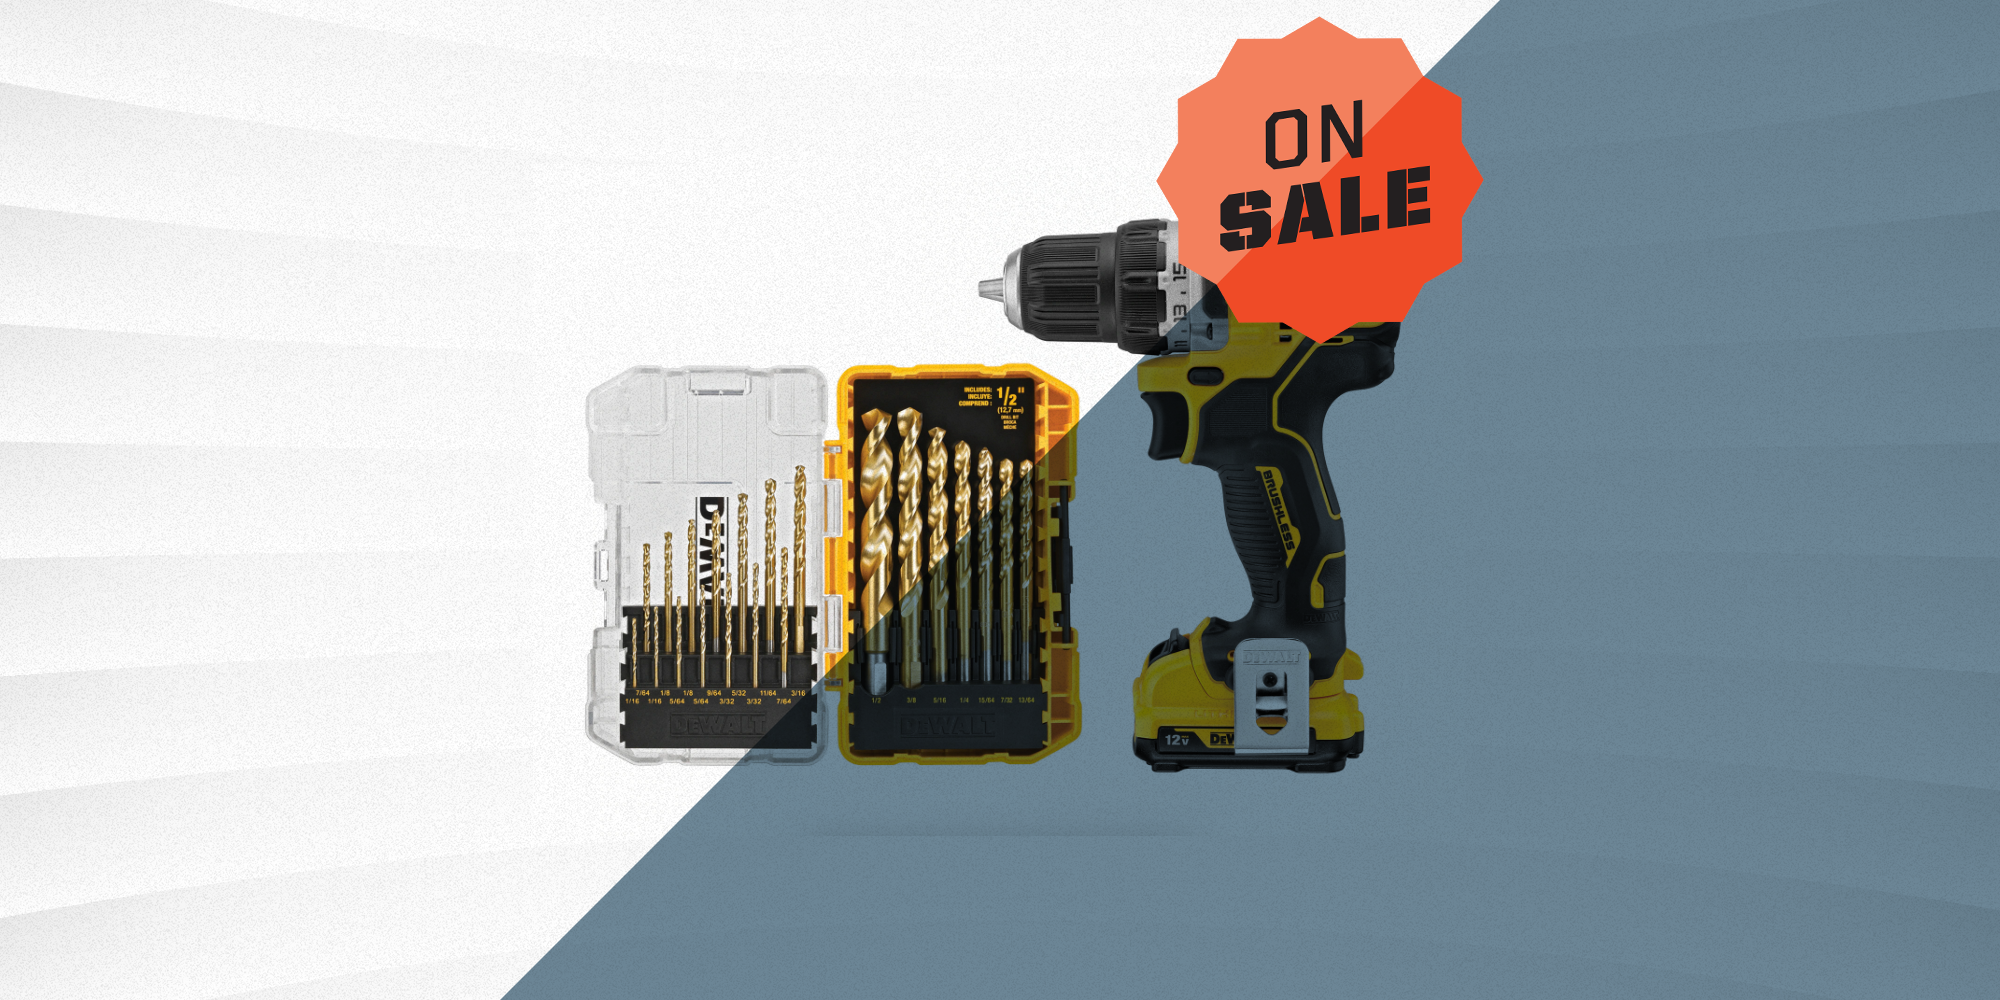 Save 31 % on This DeWalt 12V Cordless Drill and Bit Set at Lowe 